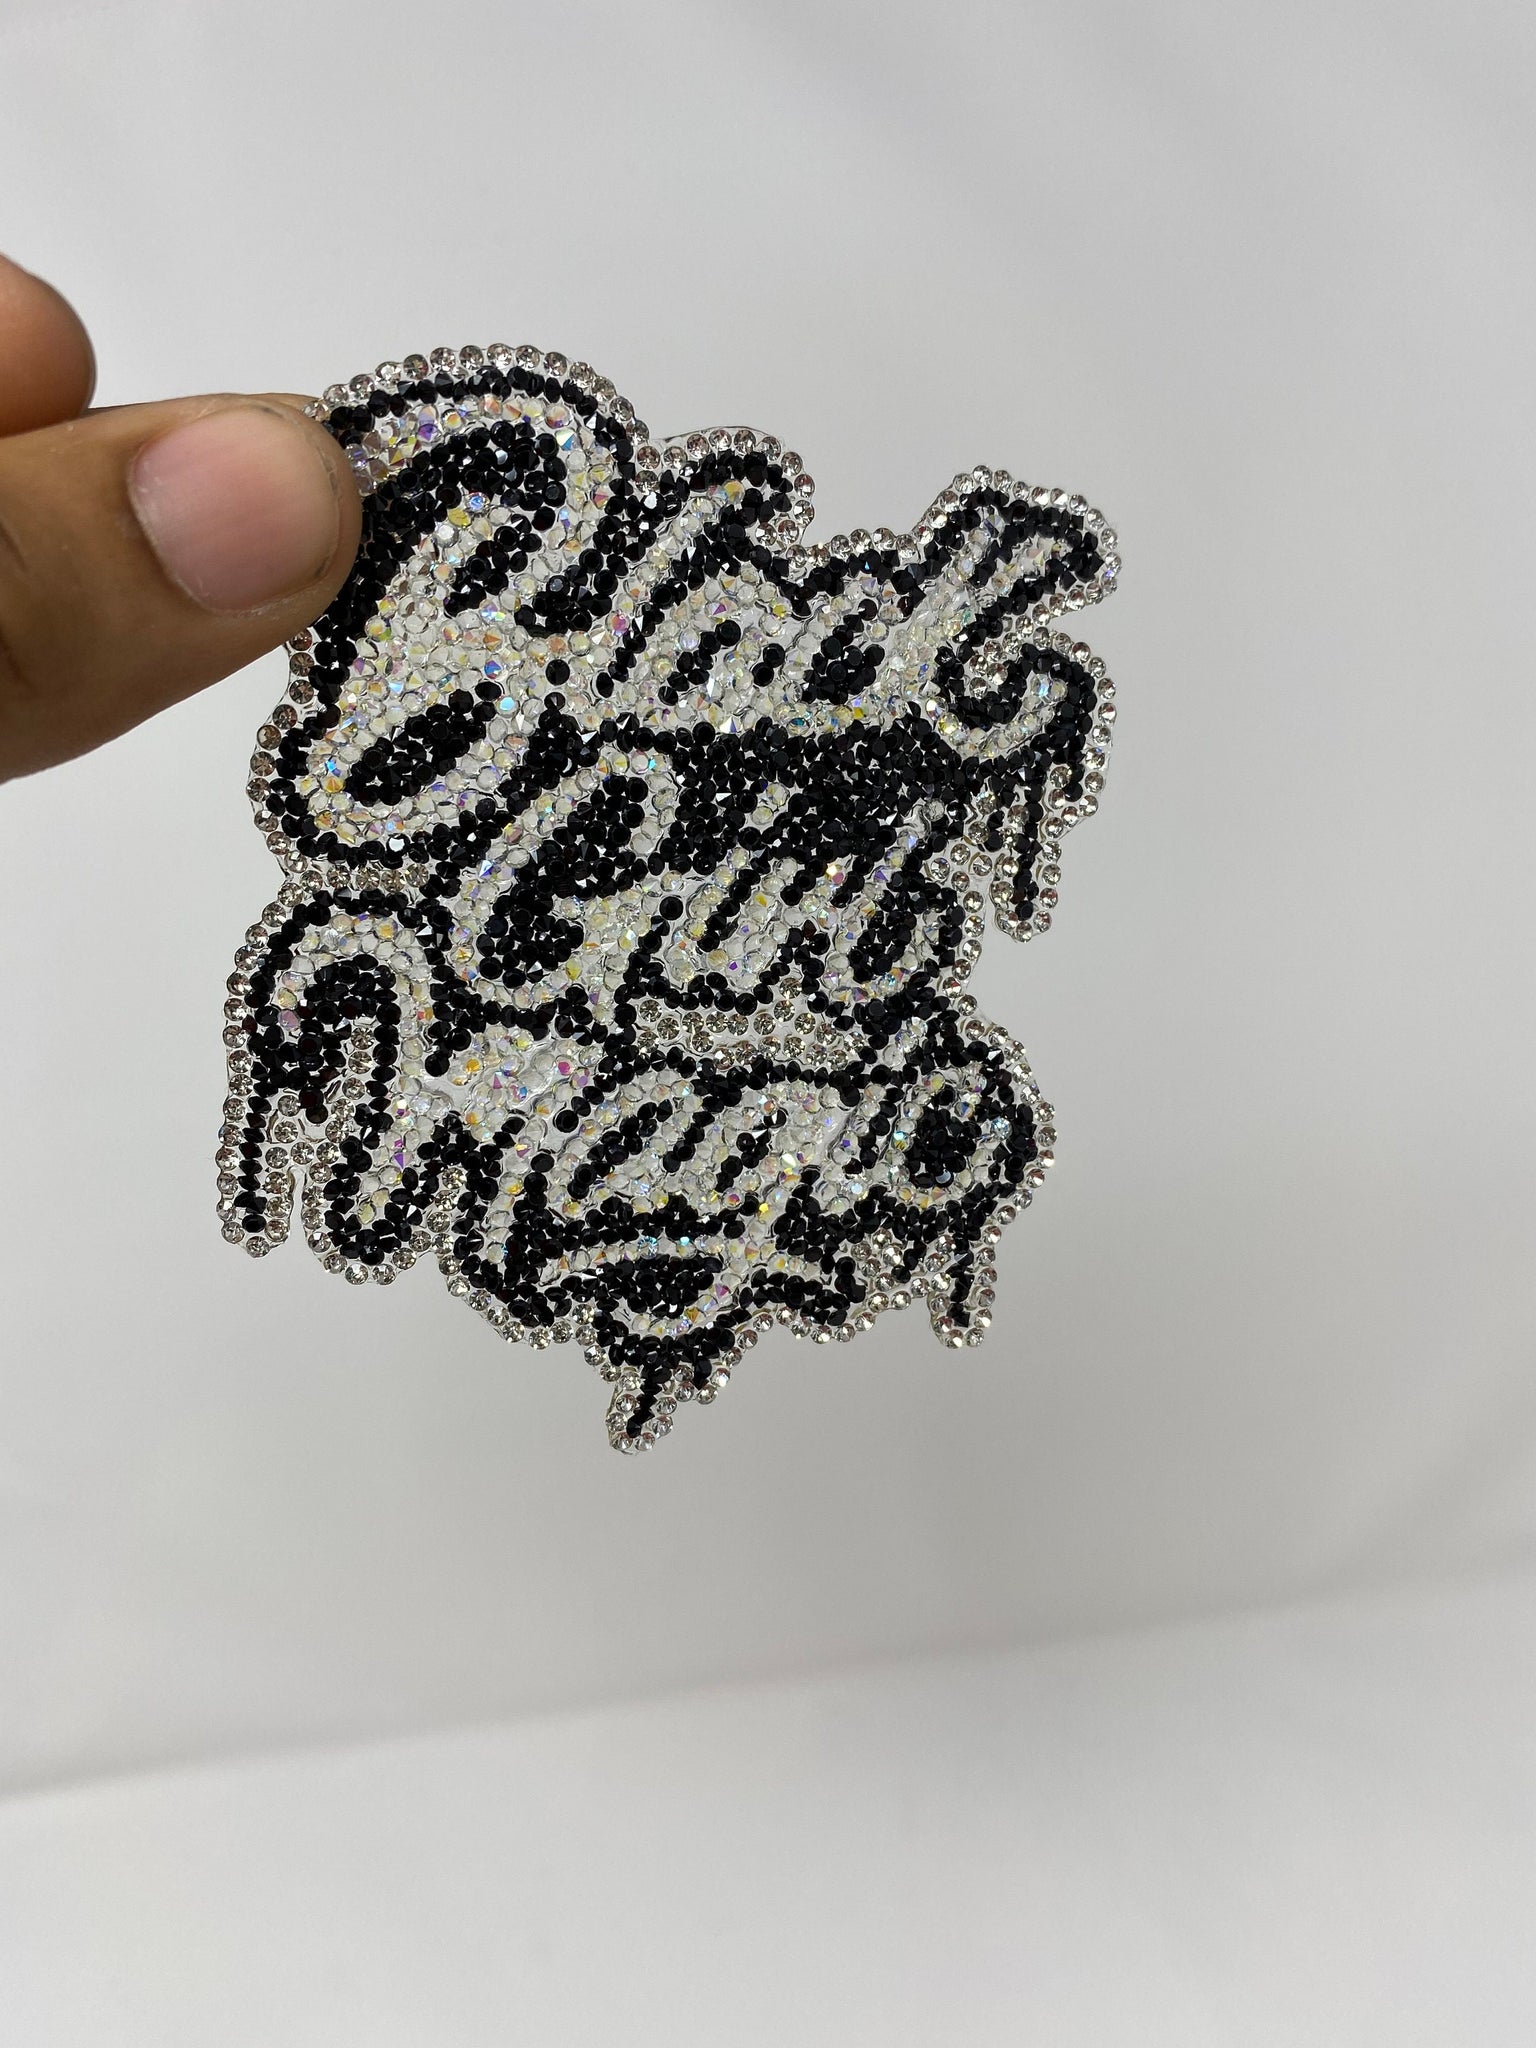 NEW, Blinged Out "Drippin, Black Girl Magic"  DIY Applique, Size 4",  Adhesive Rhinestone Patch, Czech Rhinestones, DIY Applique